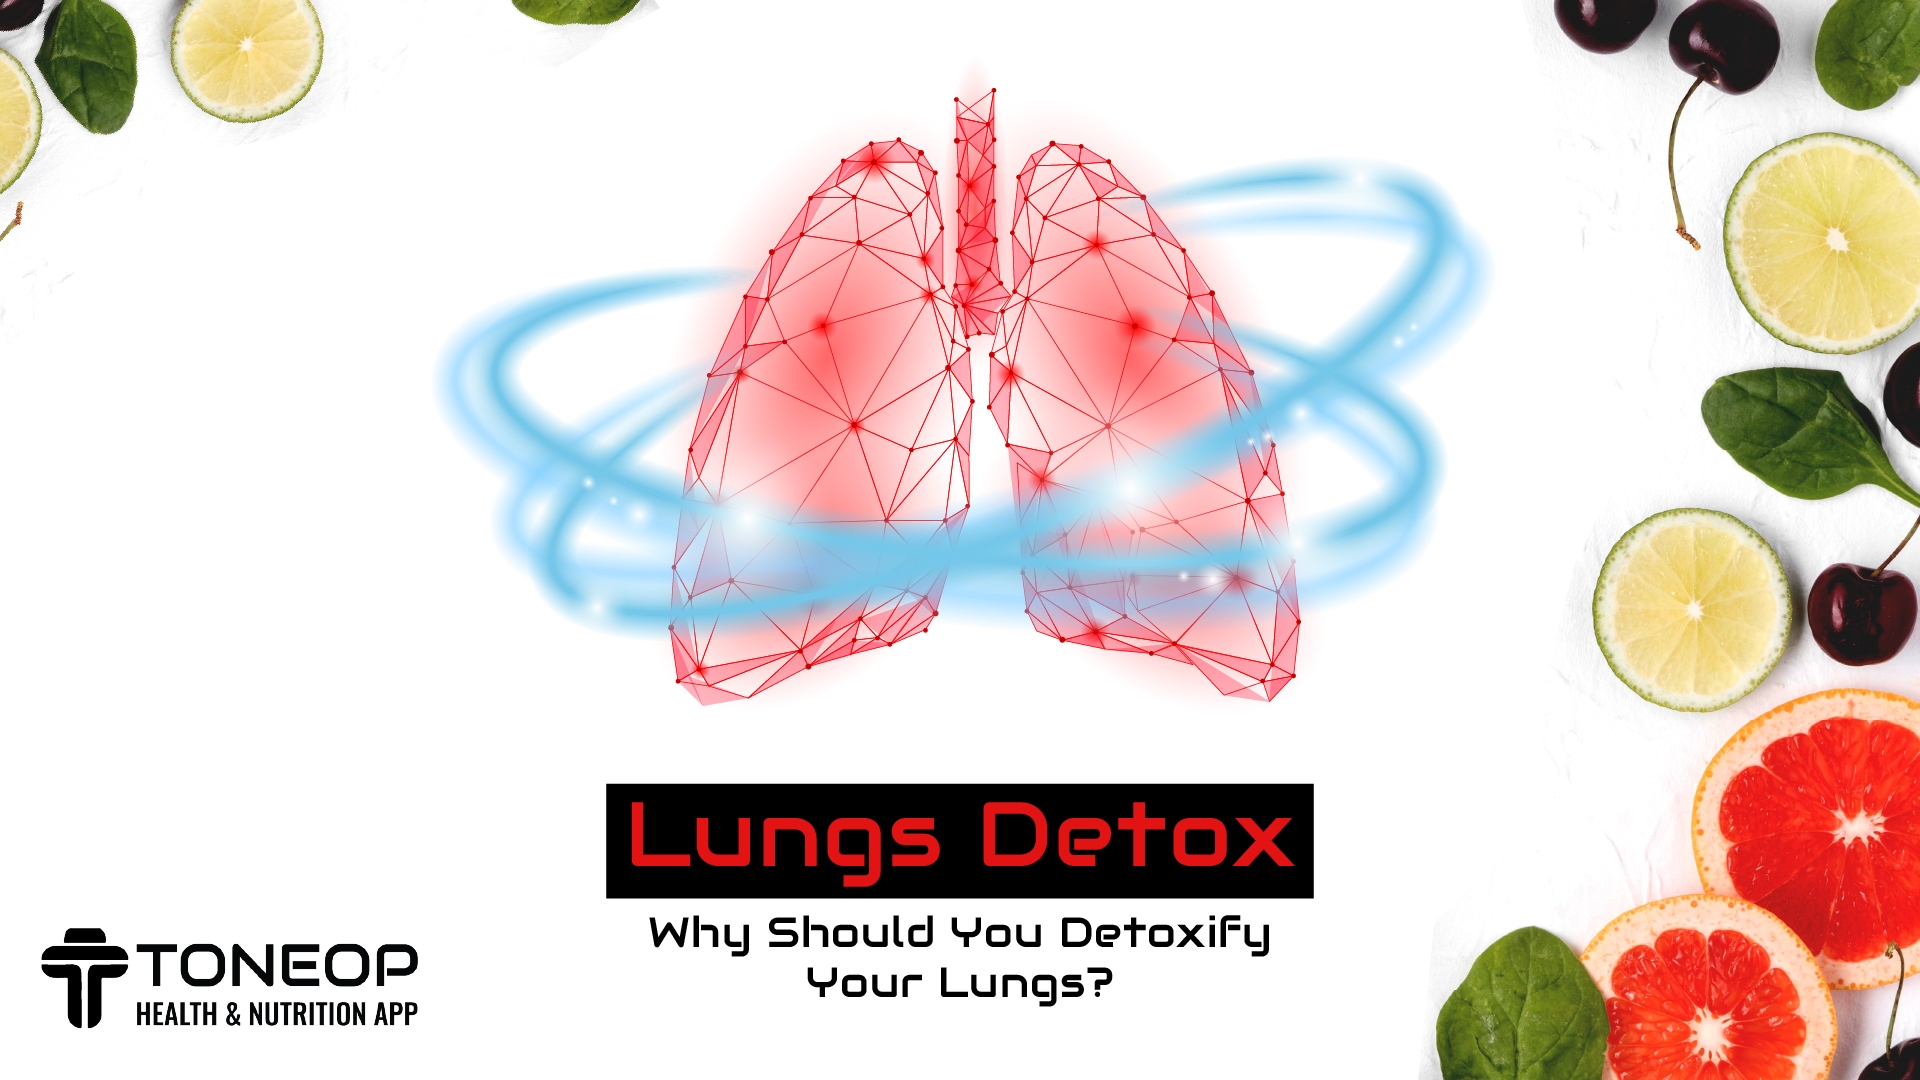 Lungs Detox: Why Should You Detoxify Your Lungs?